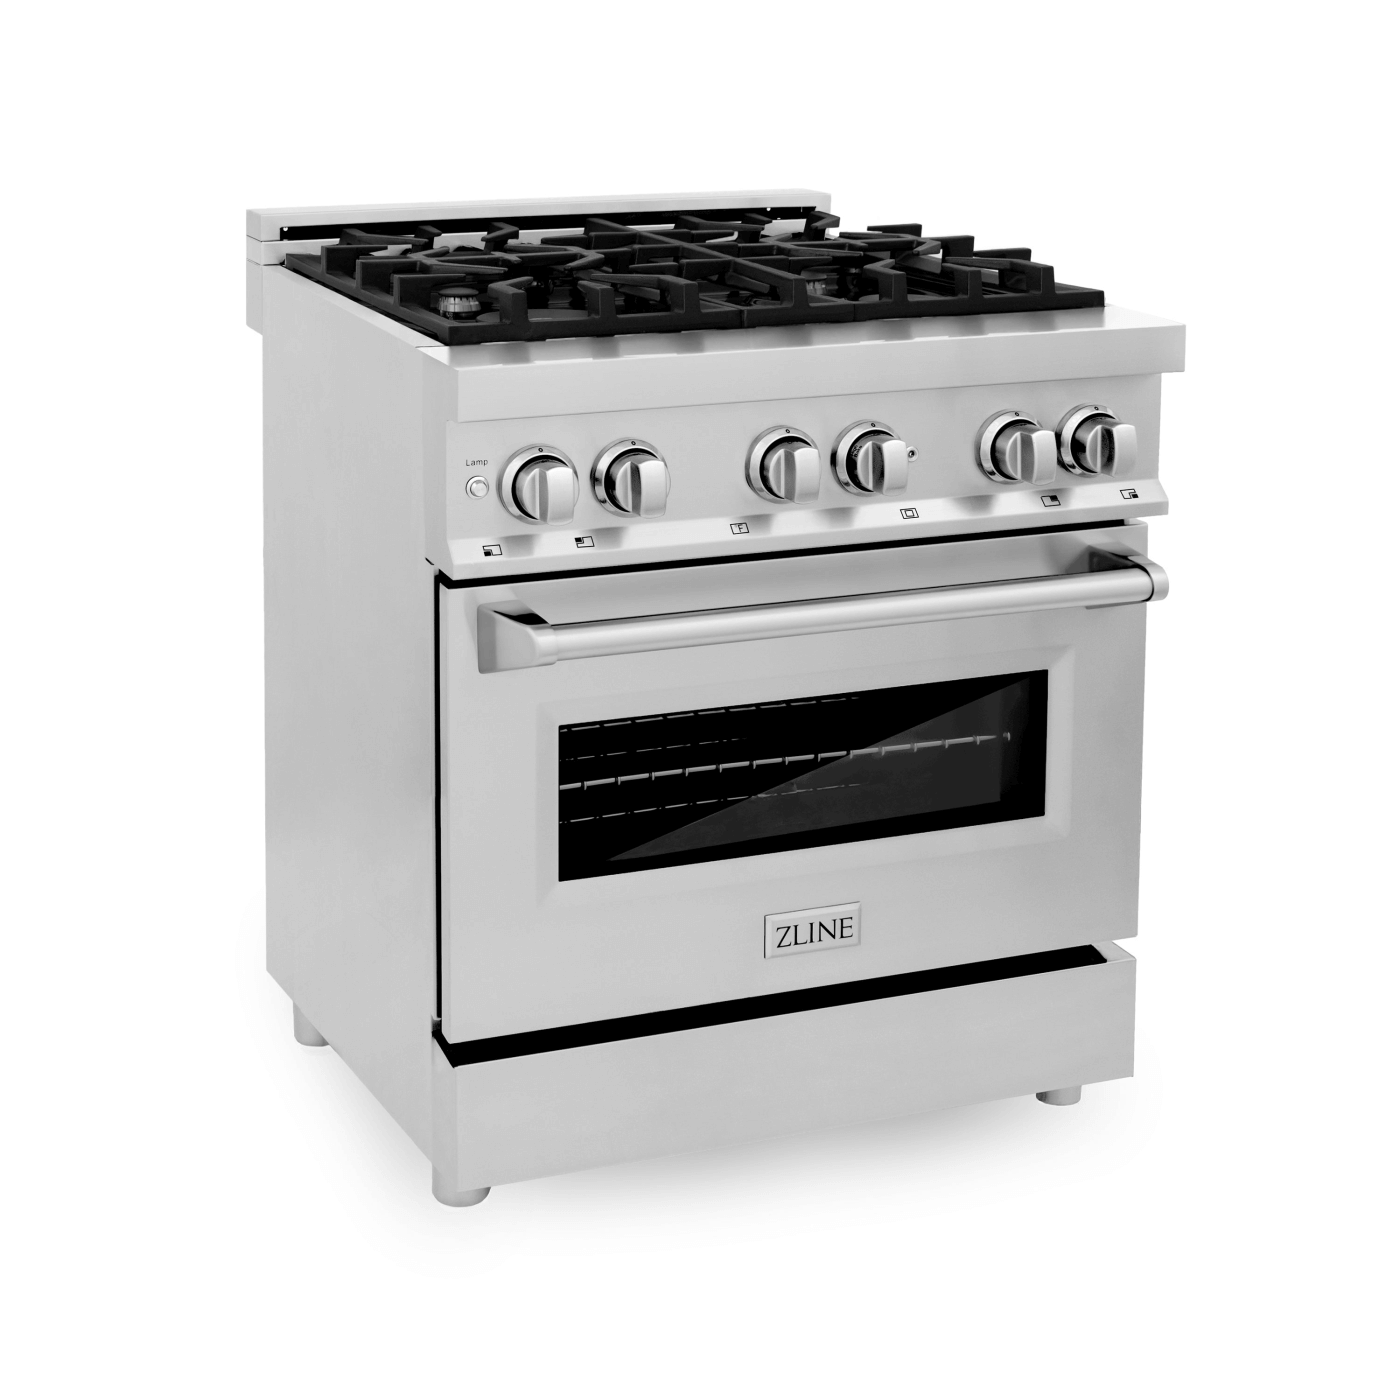 ZLINE 30 in. 4.0 cu. ft. Dual Fuel Range with Gas Stove and Electric Oven in Stainless Steel (RA30) - white background